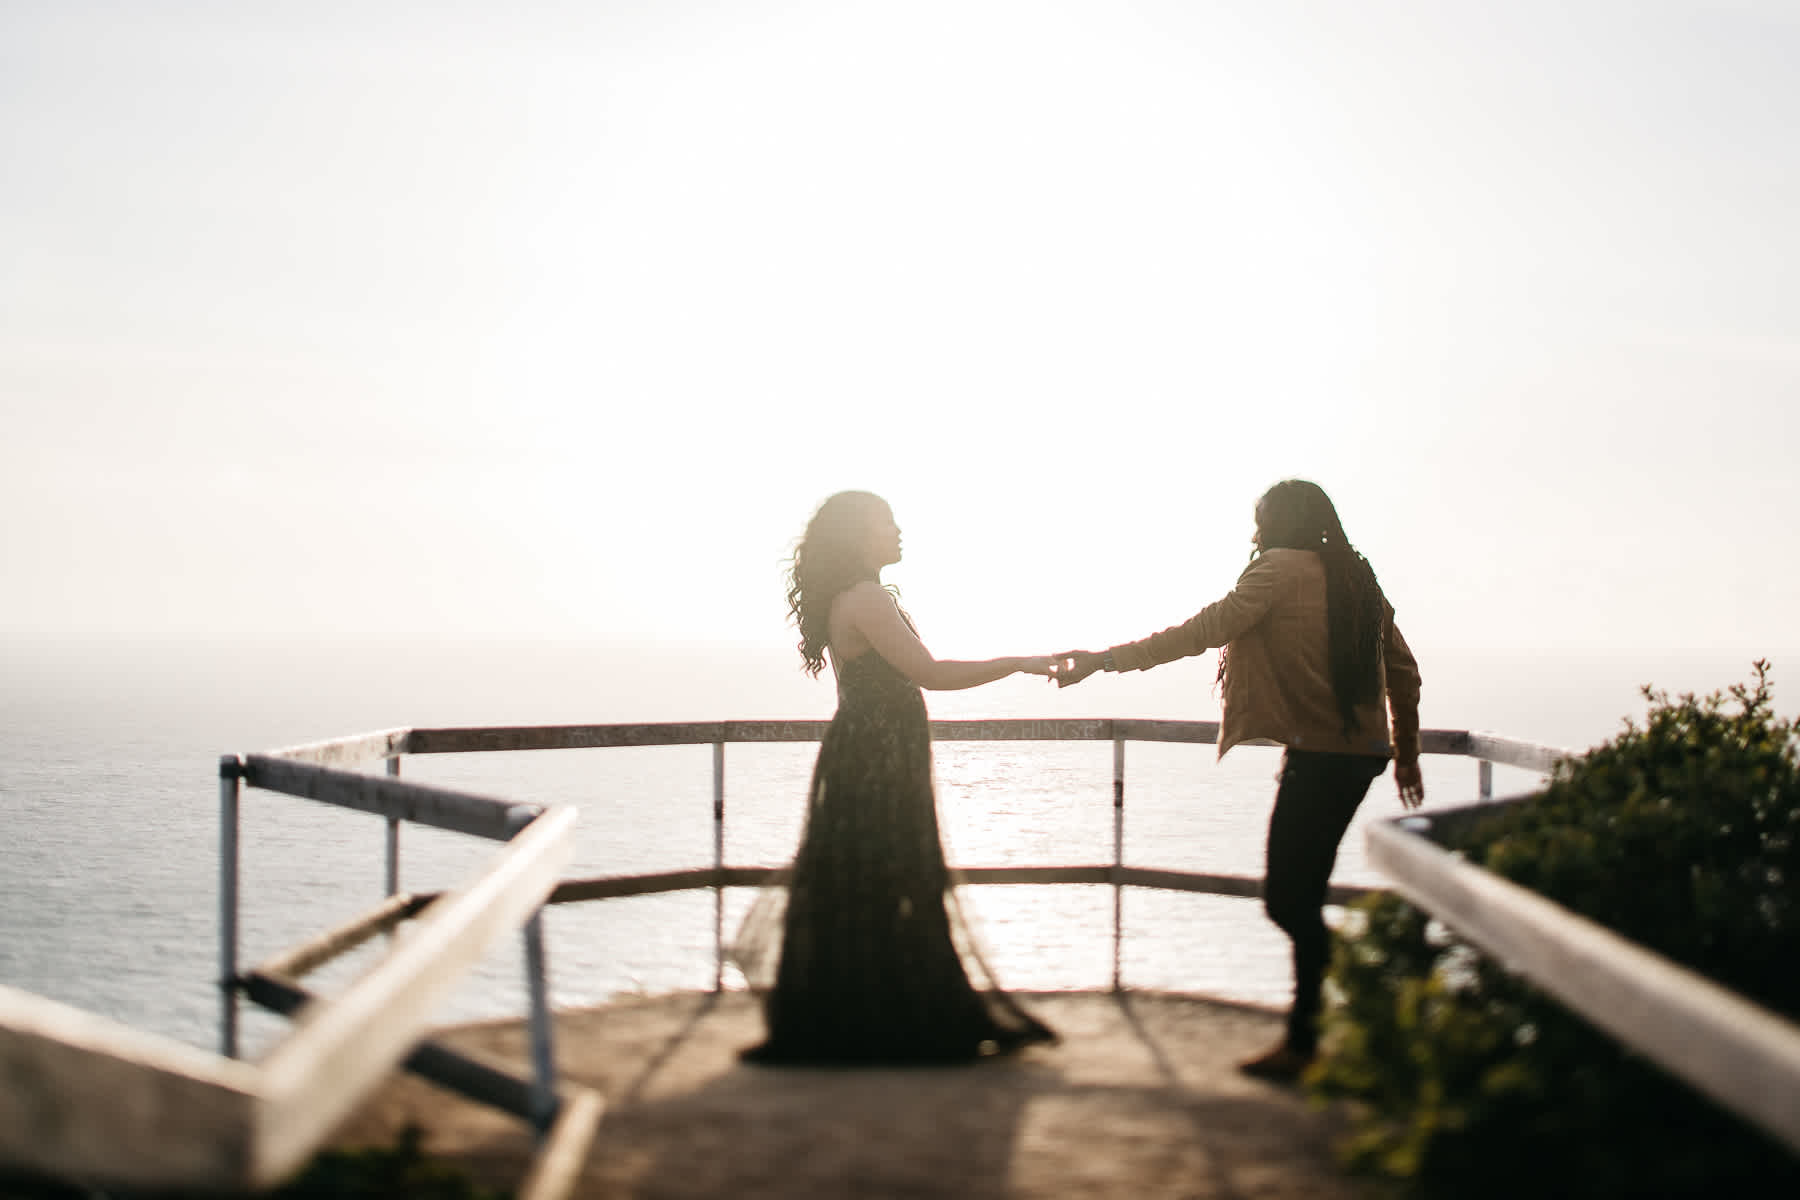 muir-beach-ca-spring-lifestyle-engagement-session-14